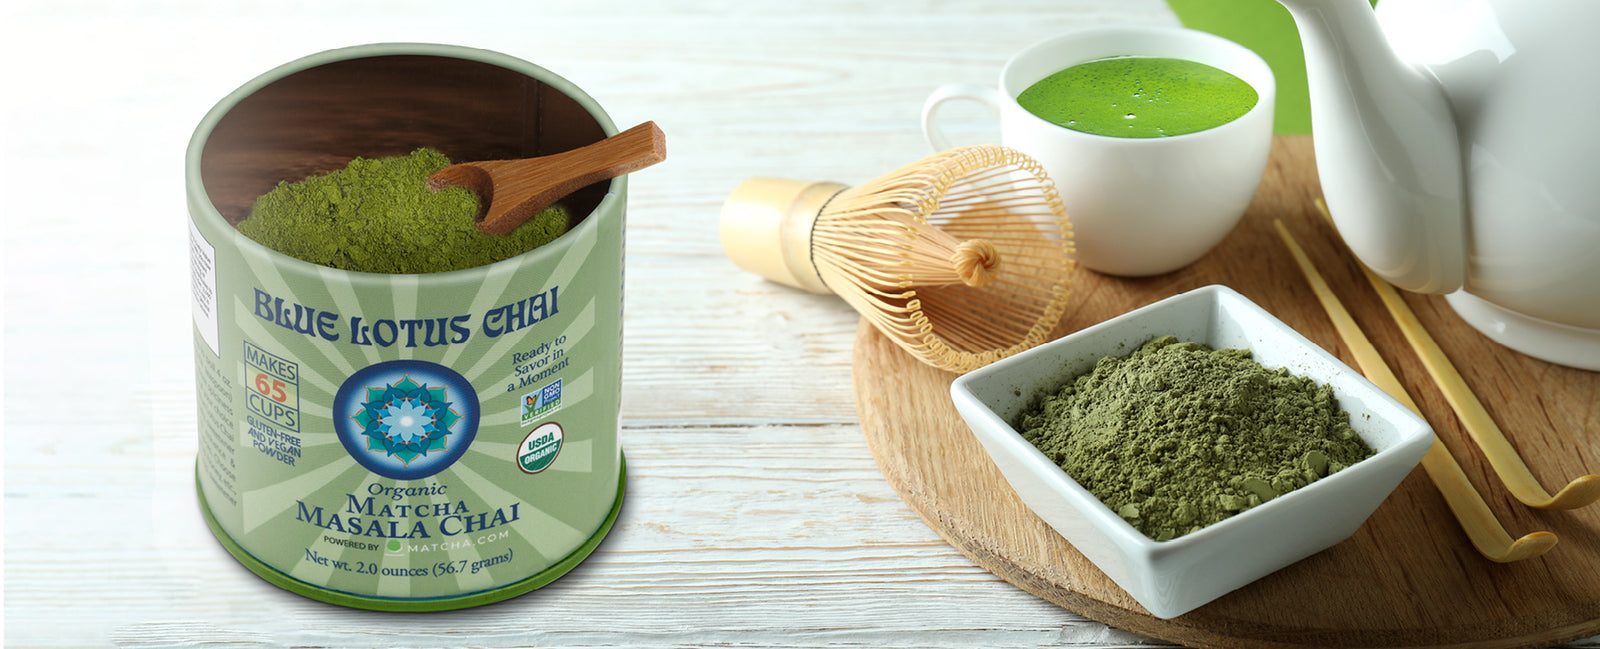 Wholesale Matcha for Cafes & Foodservice